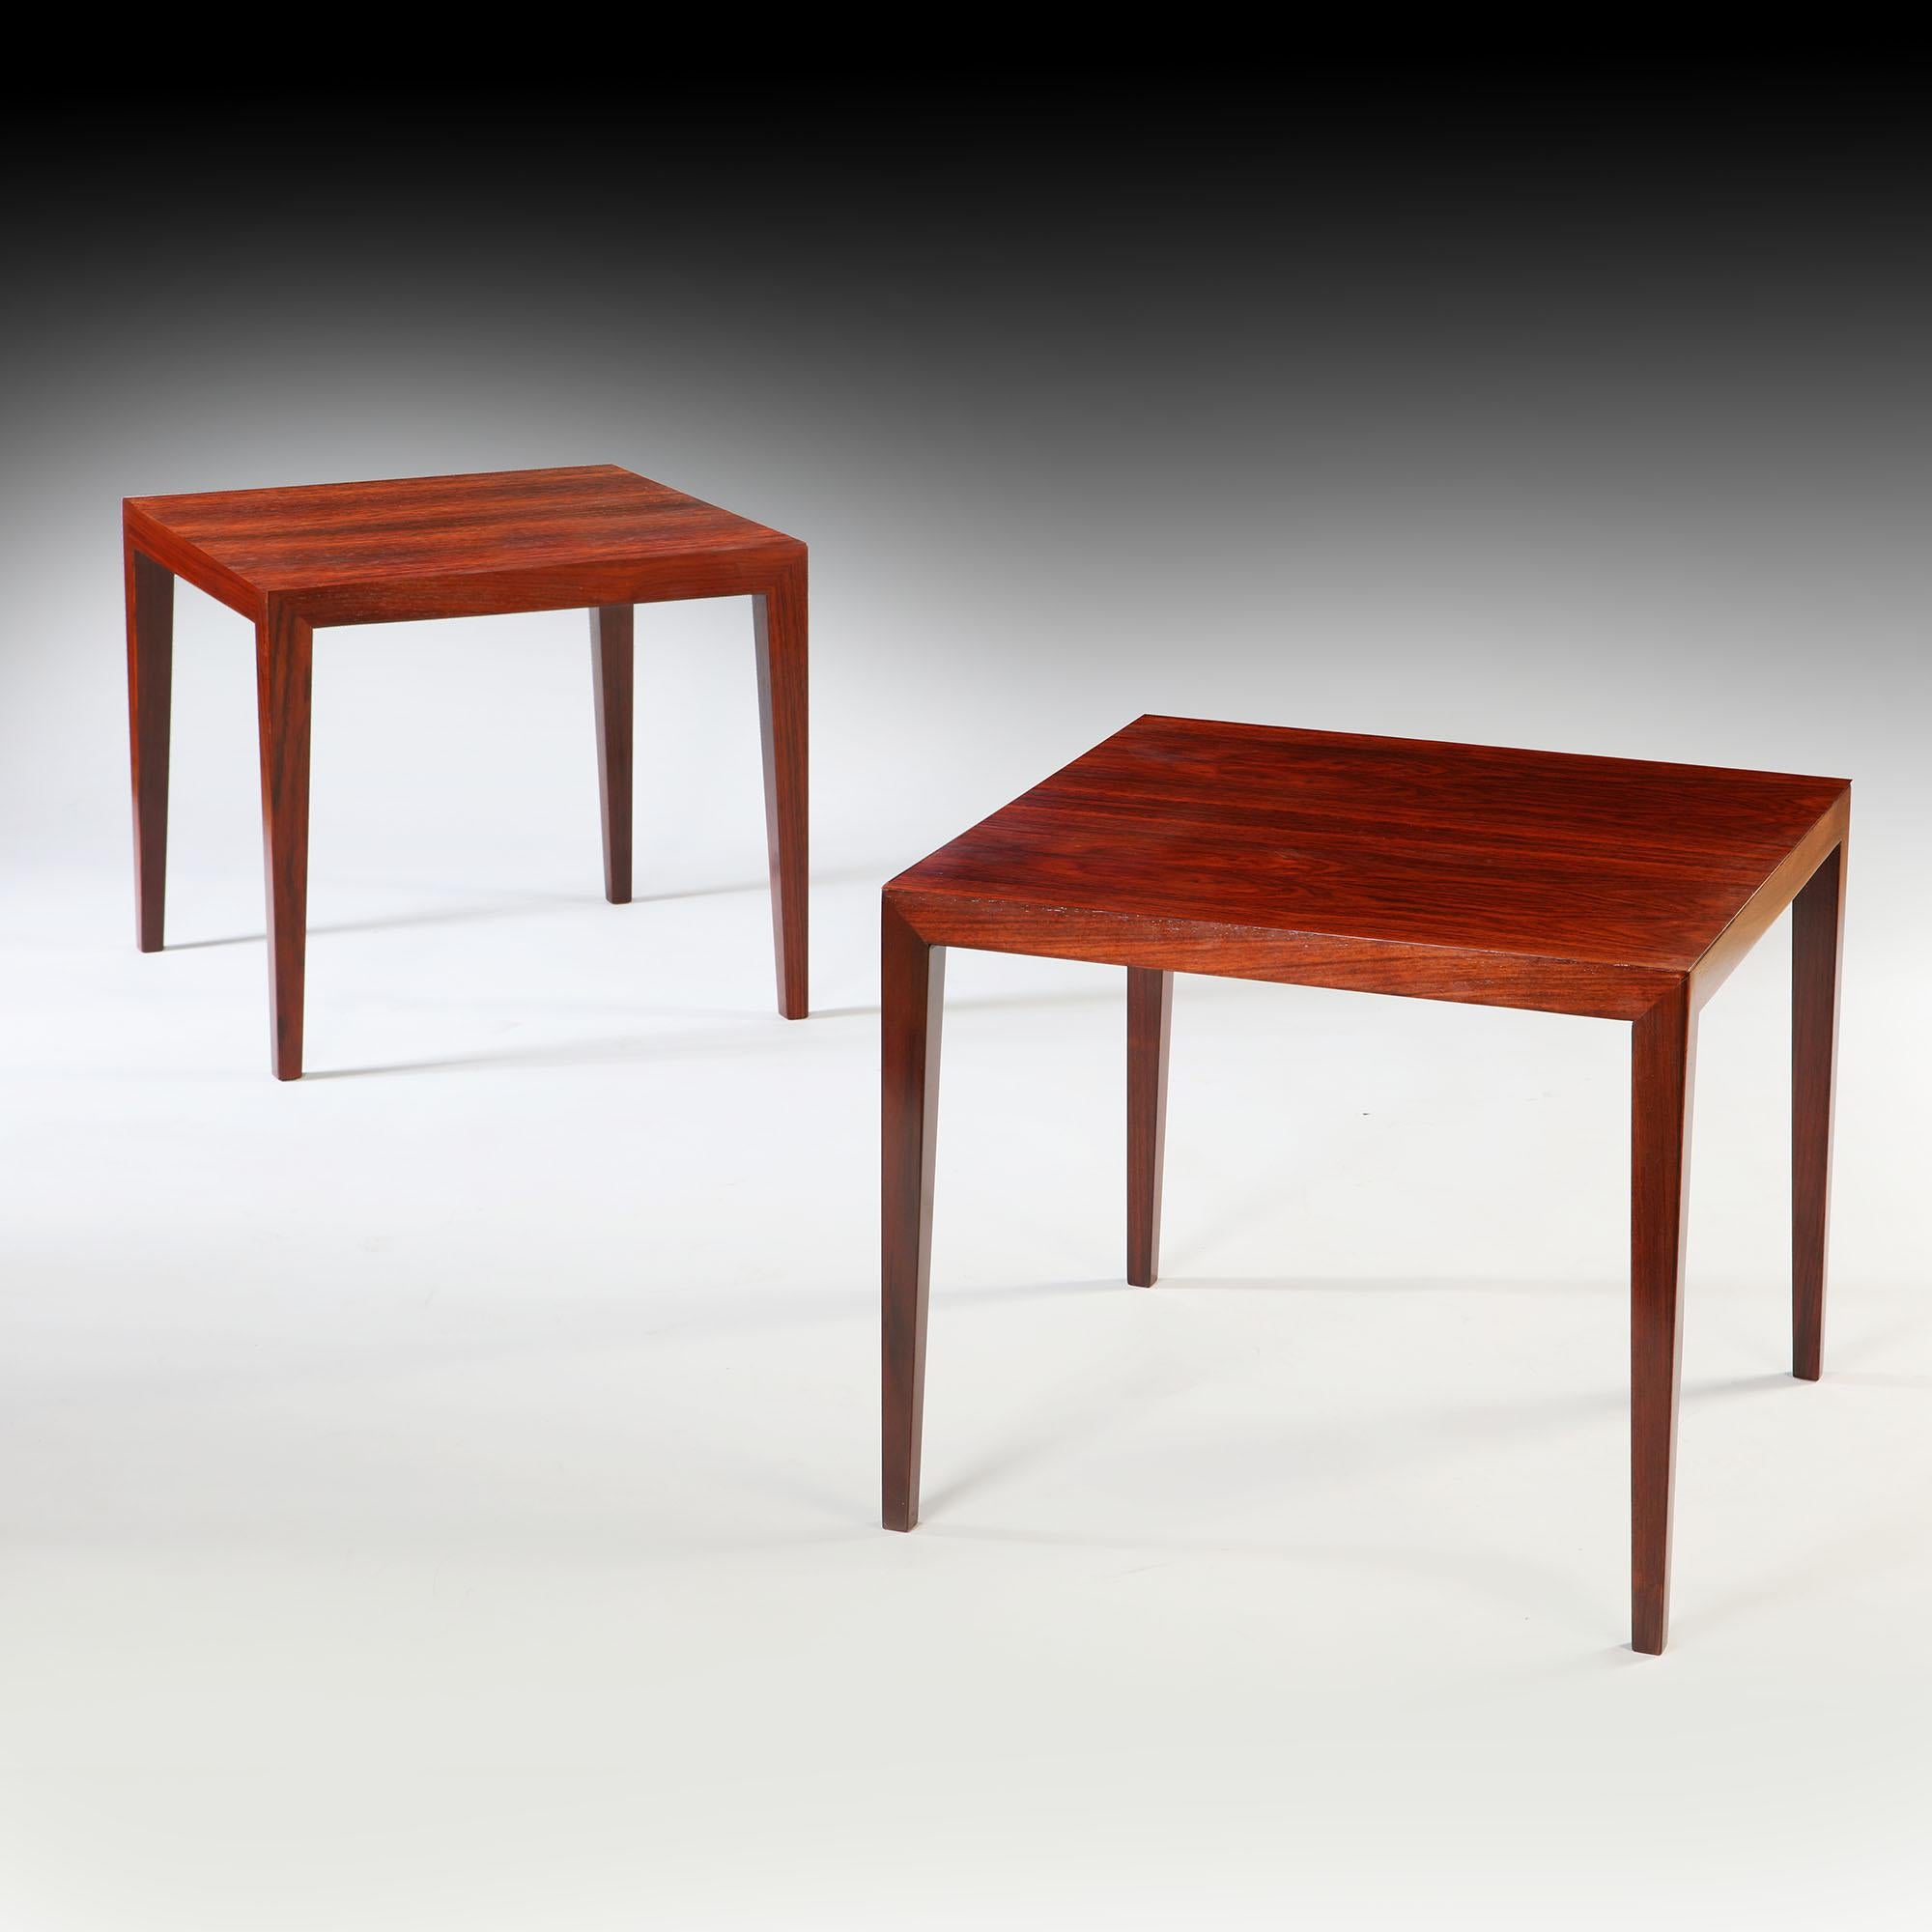 A near pair of mid-20th century Danish Goncalo Alves occasional tables, attributed to Severin Hansen.